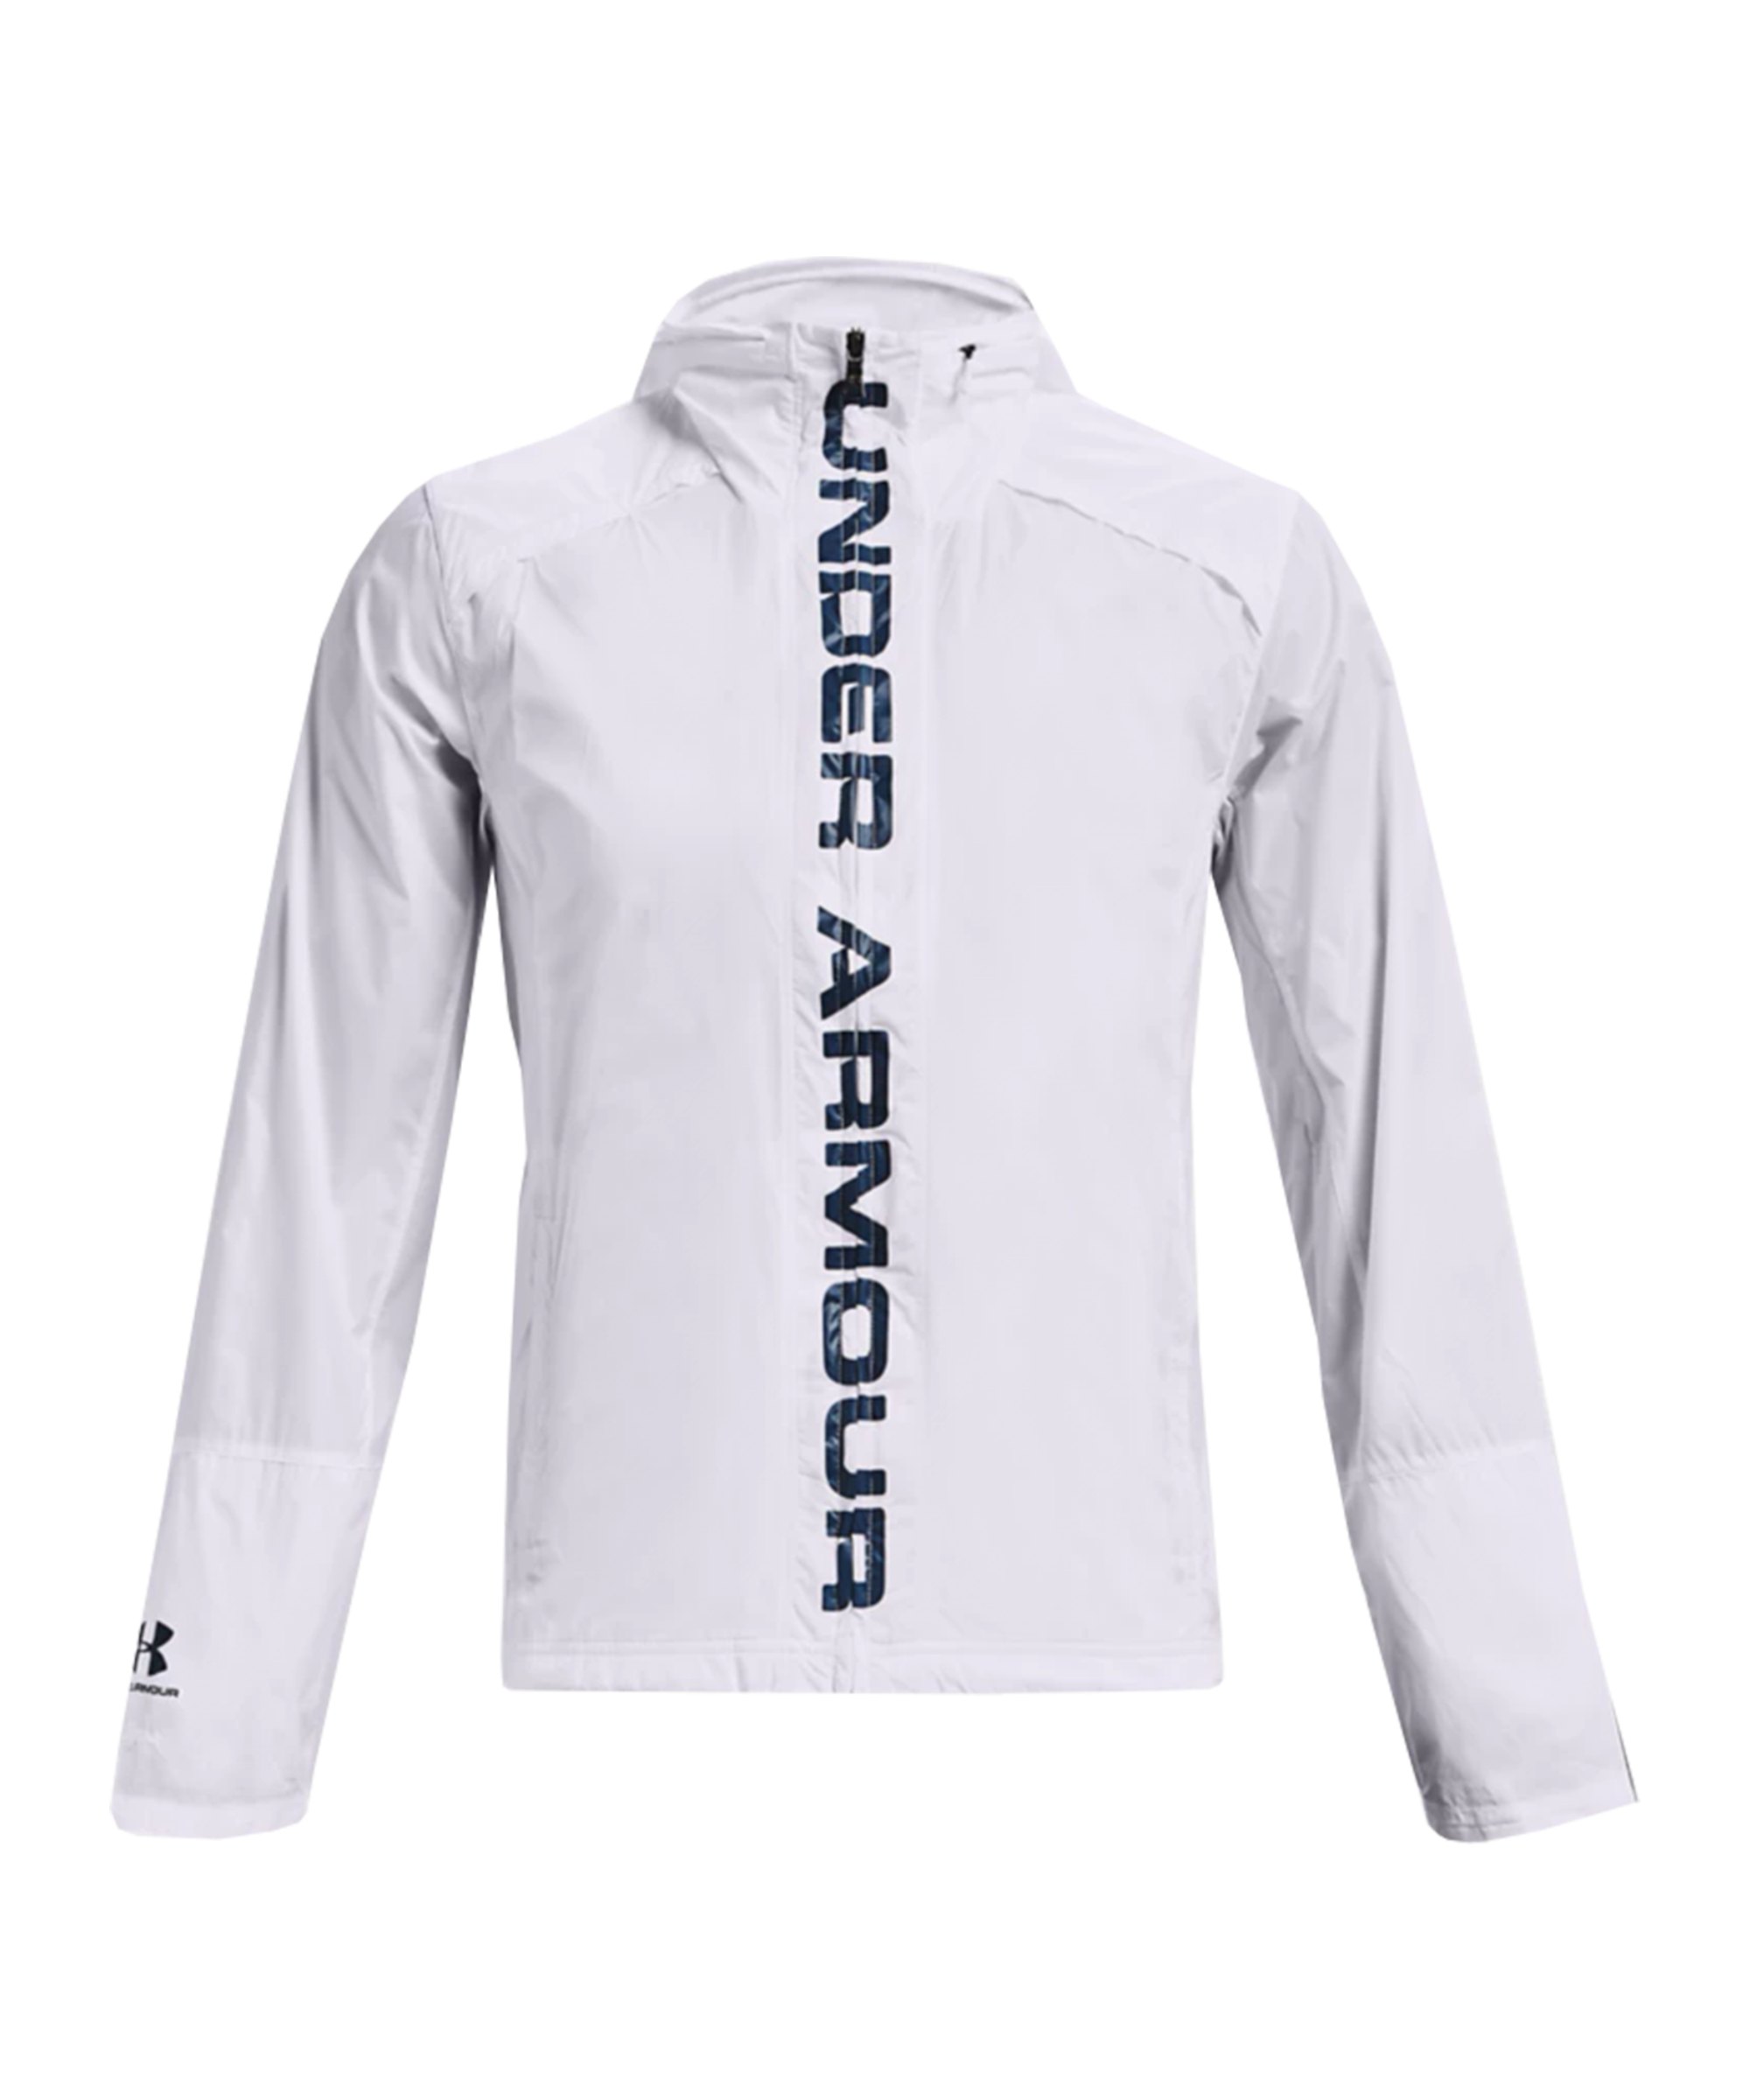 Under Armour Accelerate Pro Storm Shell Jacke F100 - weiss